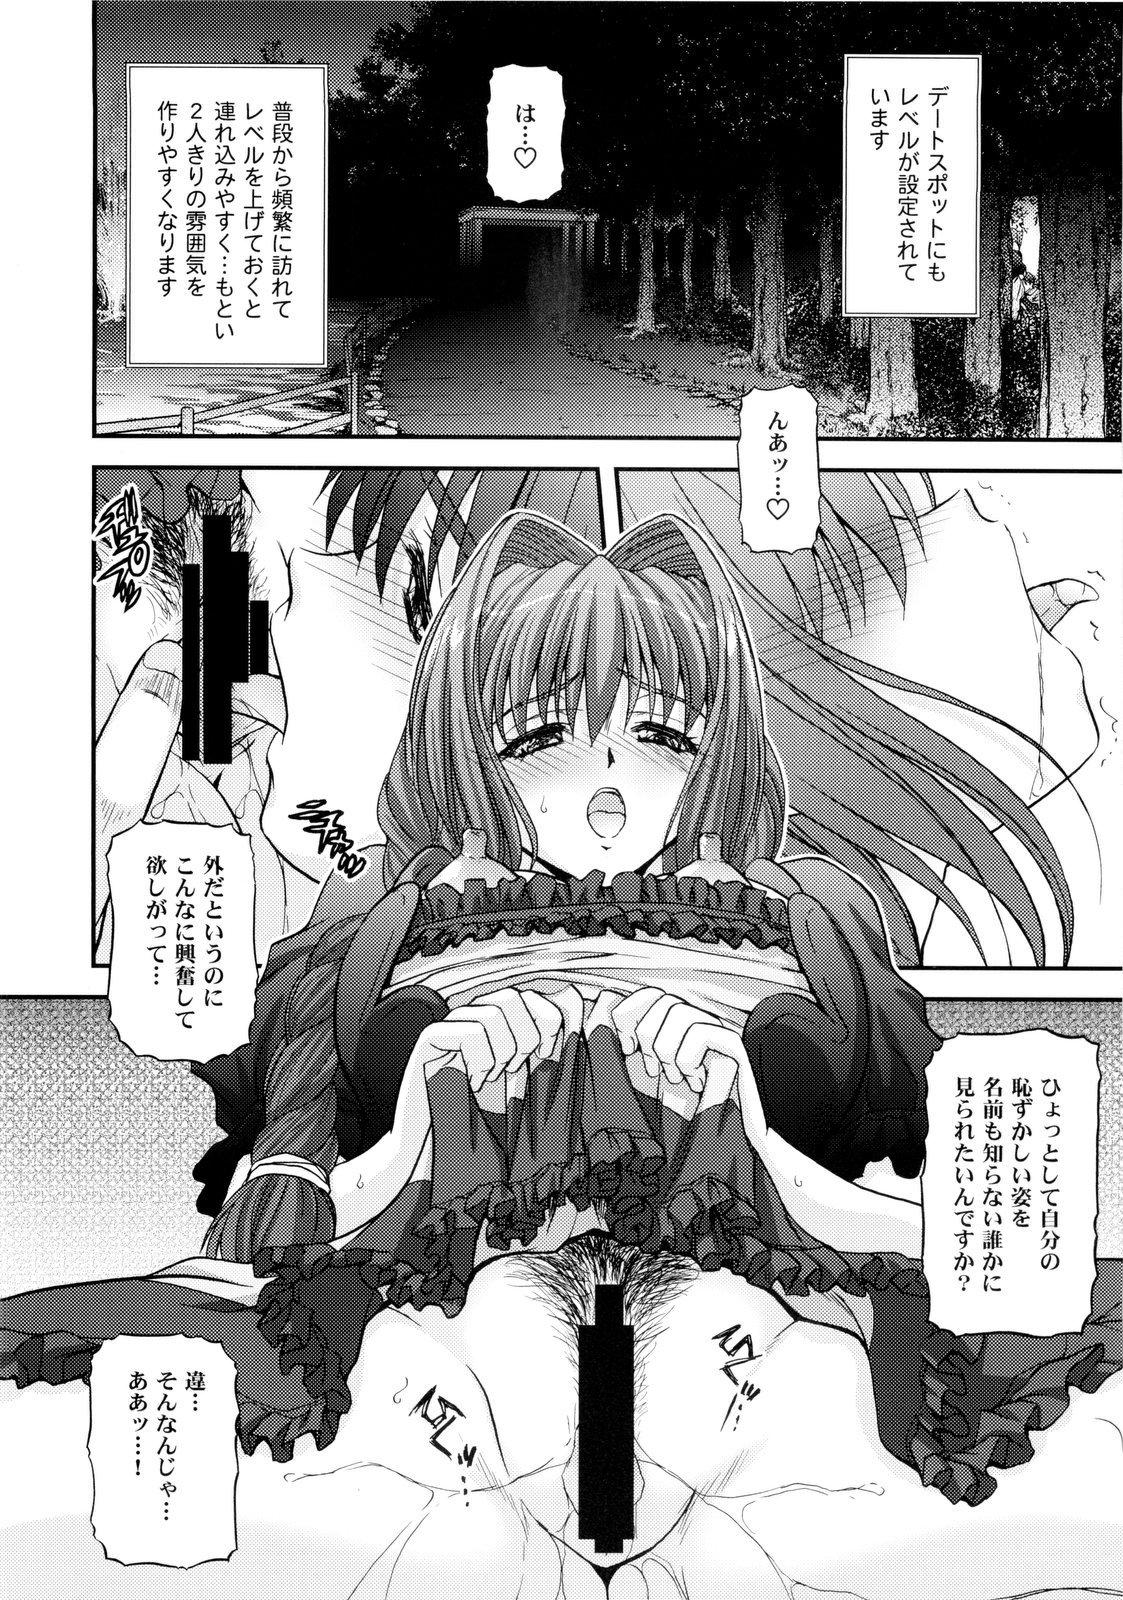 (C77) [BLUE BLOOD] BLUE BLOOD'S Vol.25 (Kanon) page 16 full